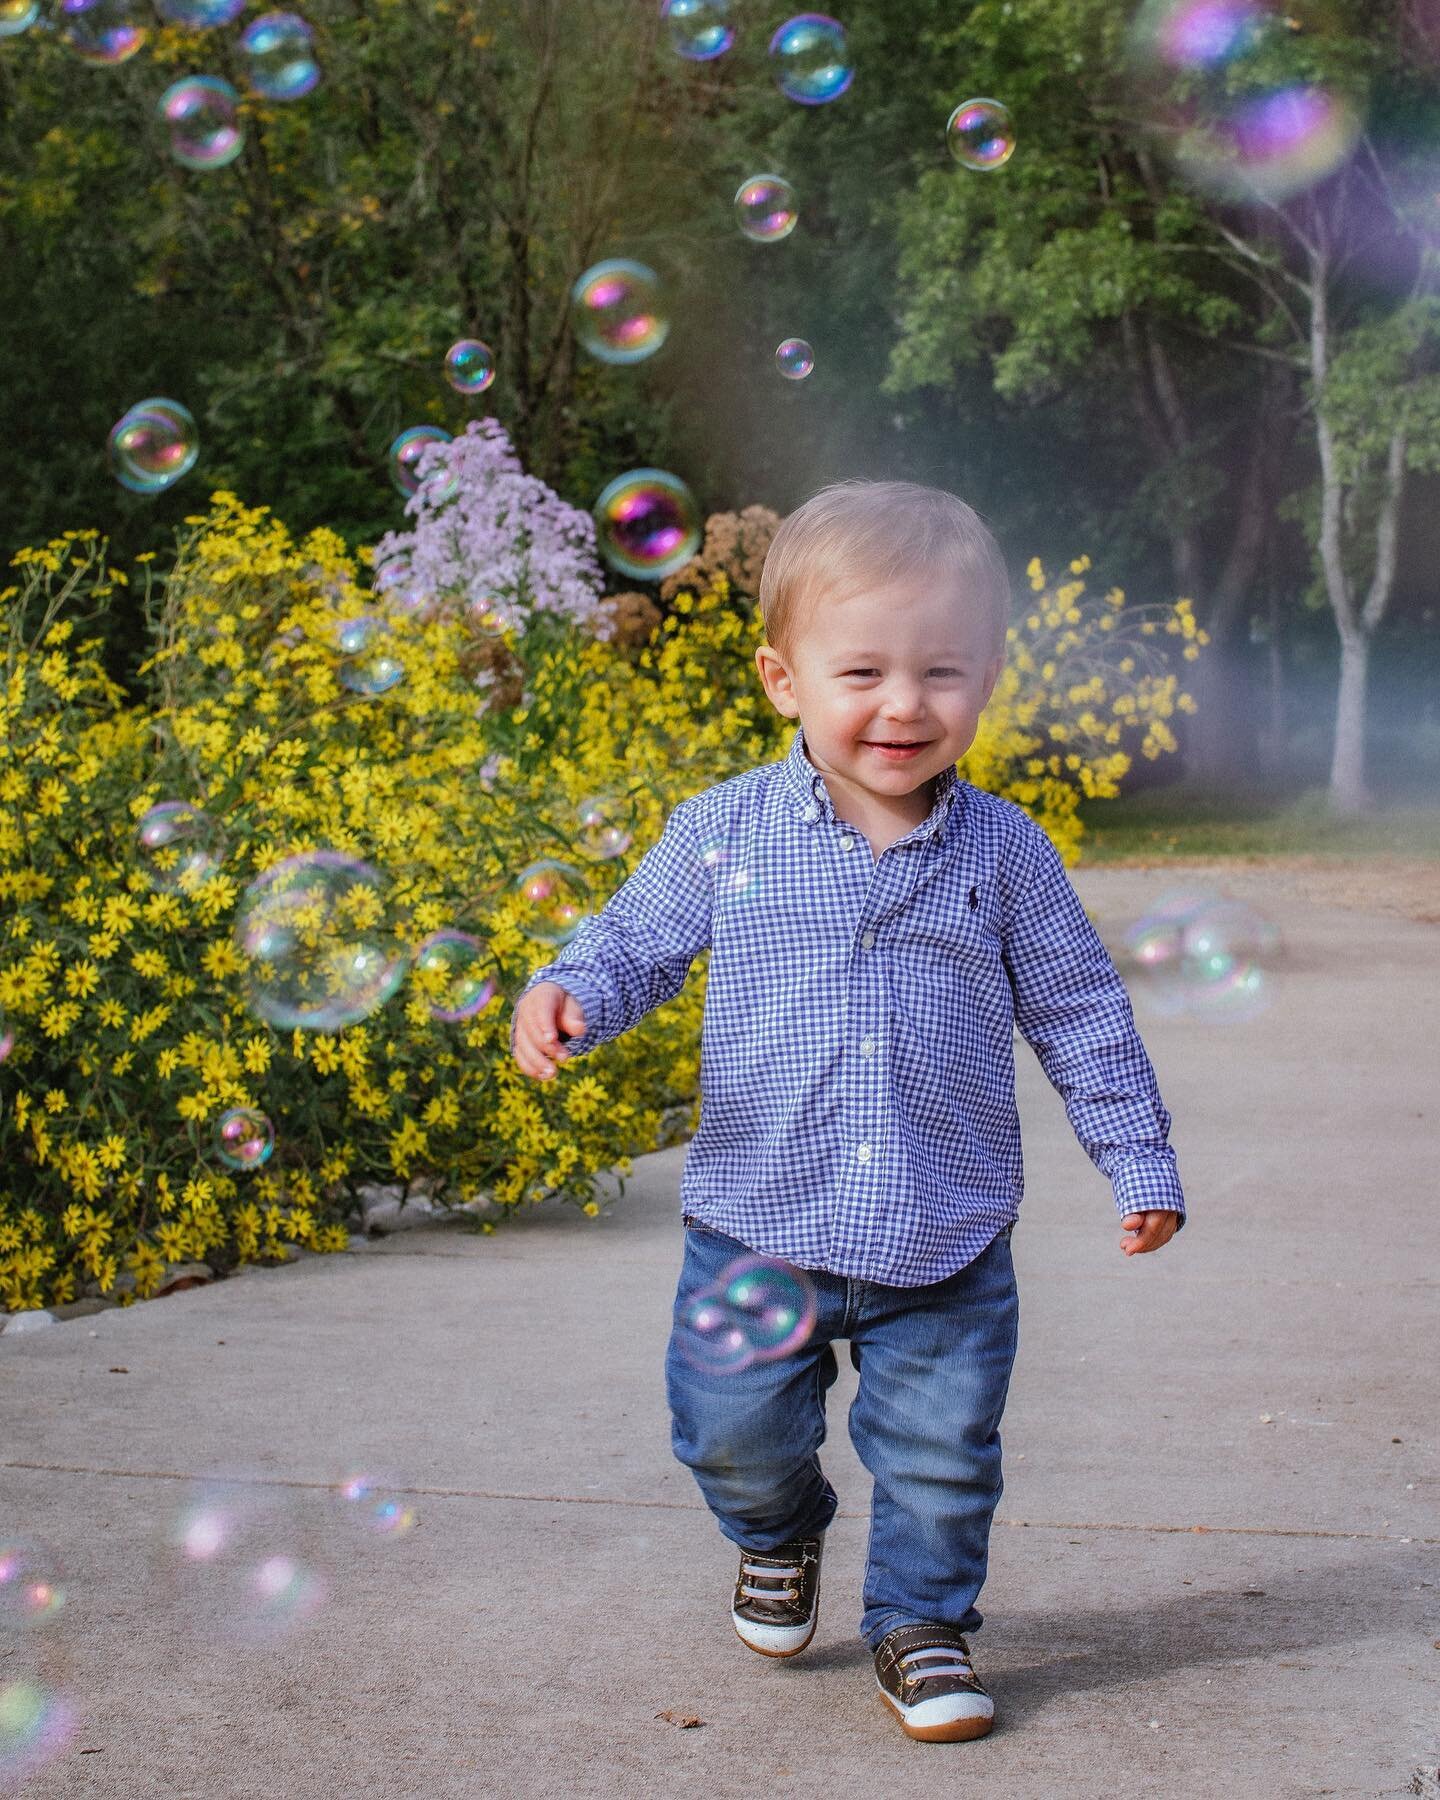 *always brings bubbles for backup* 
😅 
 I have a few more dates available for fall pics! Message me for more info 📸 
.
.
#ncphotography #familyportraits #fallphotography